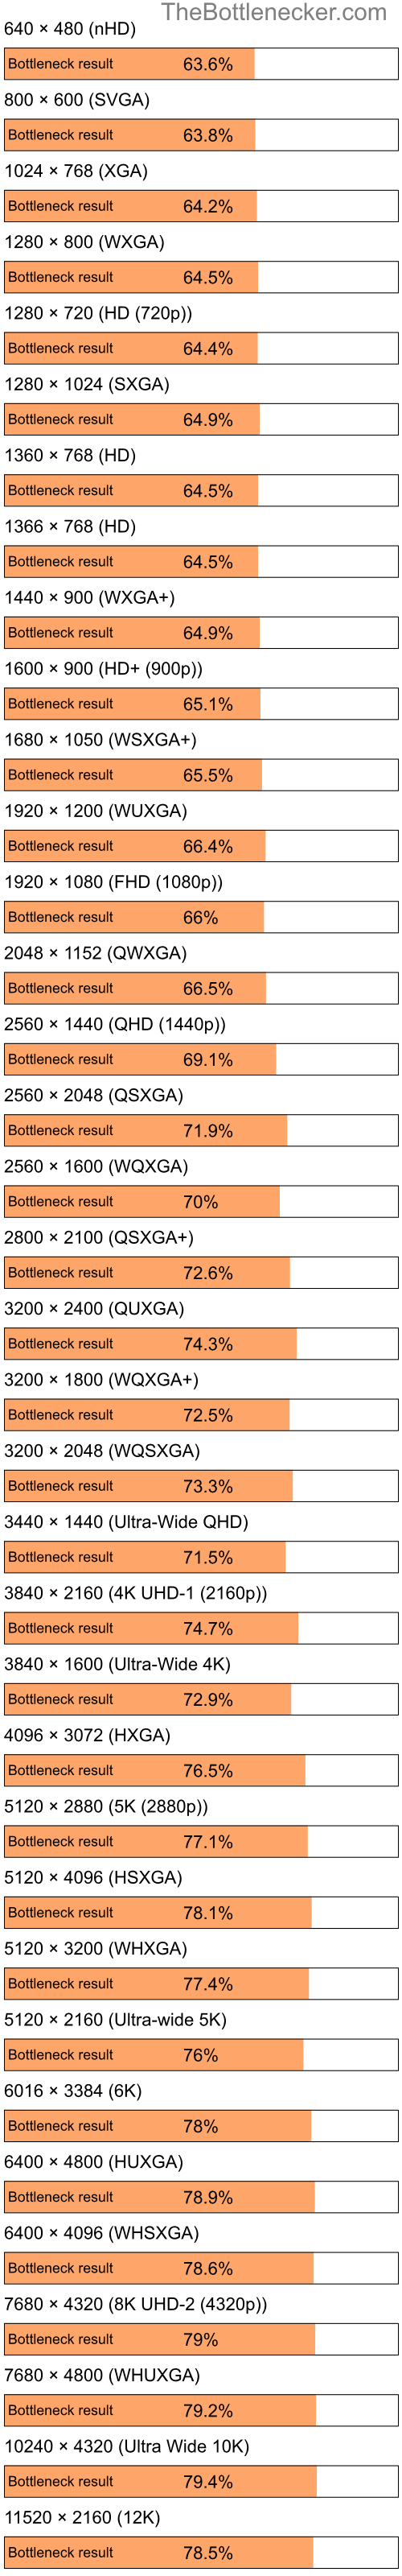 Bottleneck results by resolution for Intel Atom Z520 and NVIDIA GeForce 9400 in7 Days to Die